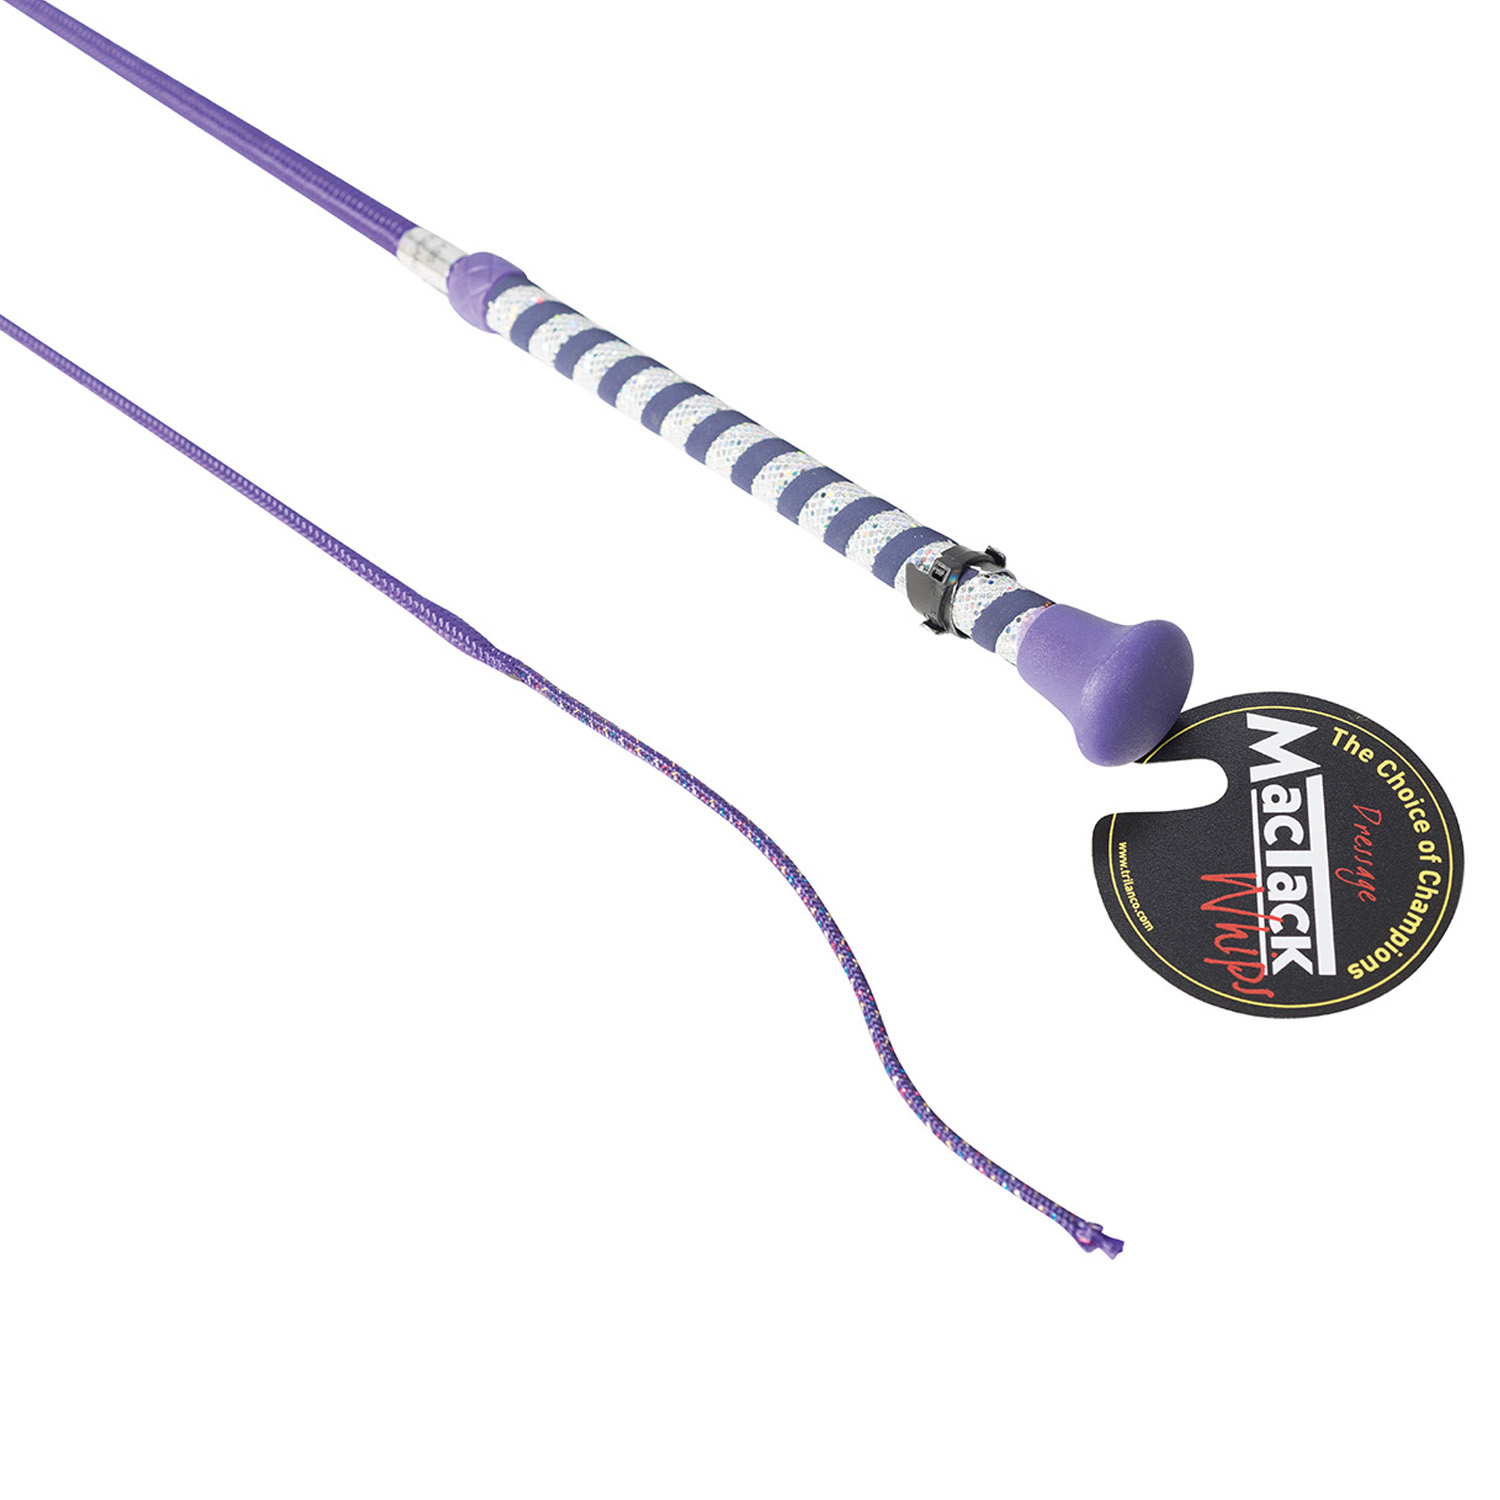 MACTACK DRESSAGE WHIP WITH SILVER GLITTER HANDLE S191 39'' PURPLE 39''